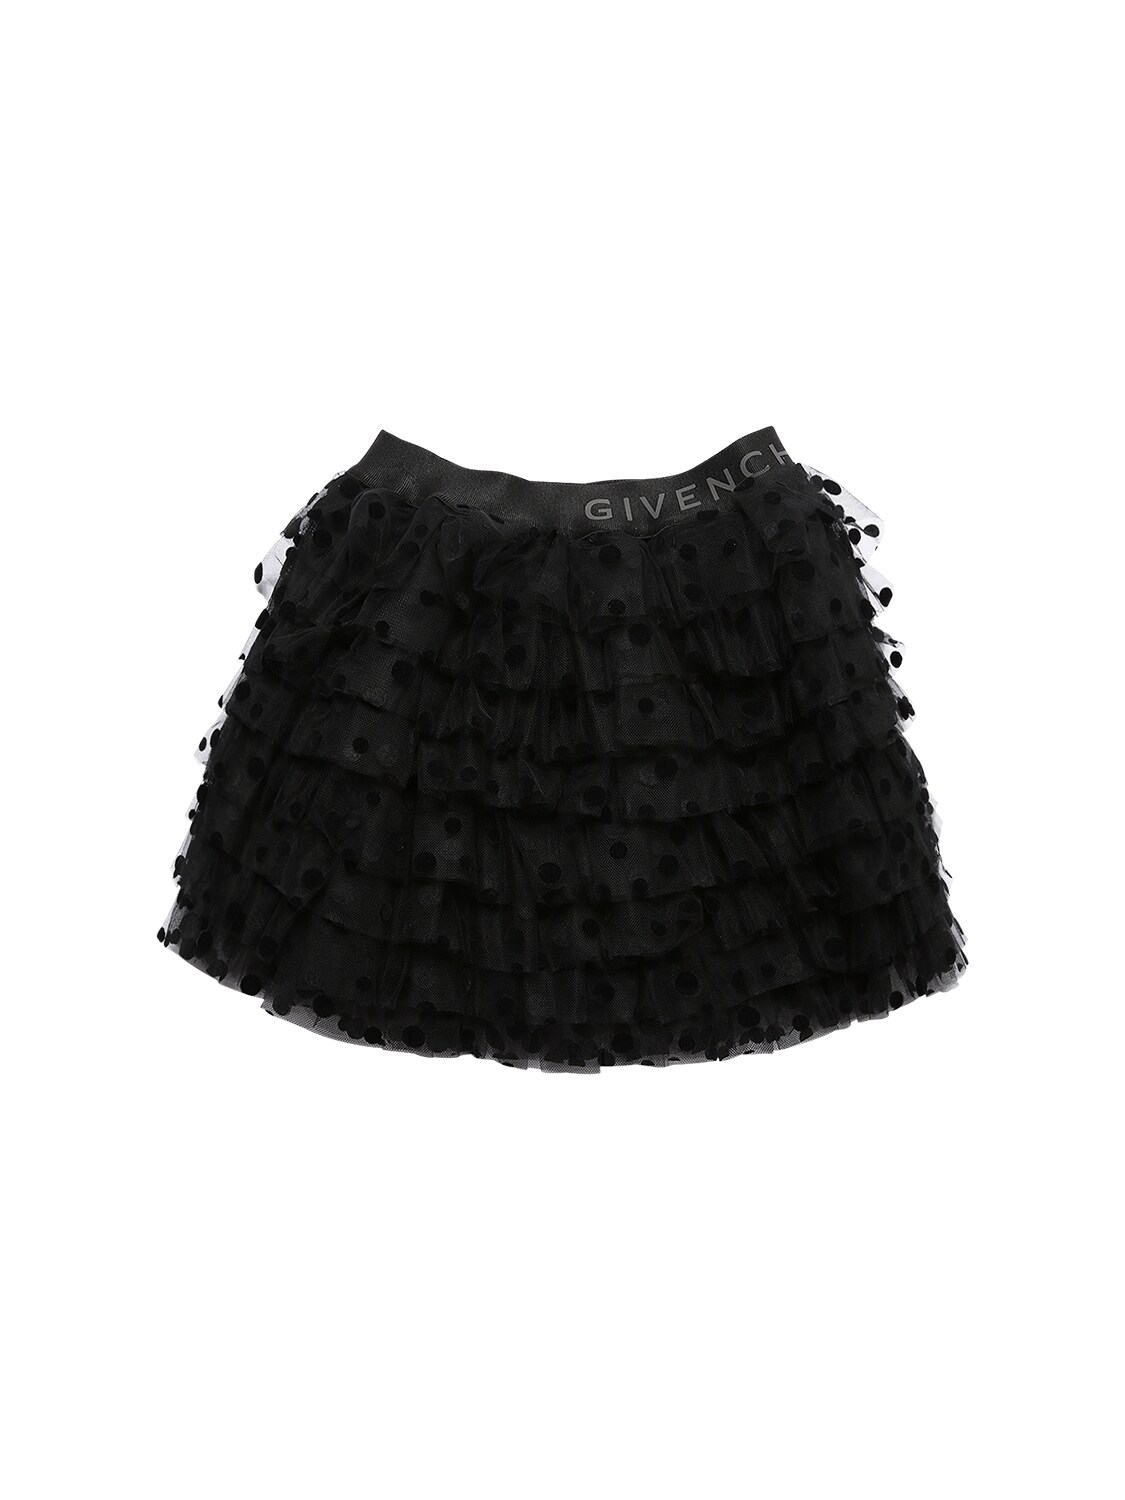 GIVENCHY ALL OVER FLOCKED STRETCH TULLE SKIRT,72IOFK008-MDLC0